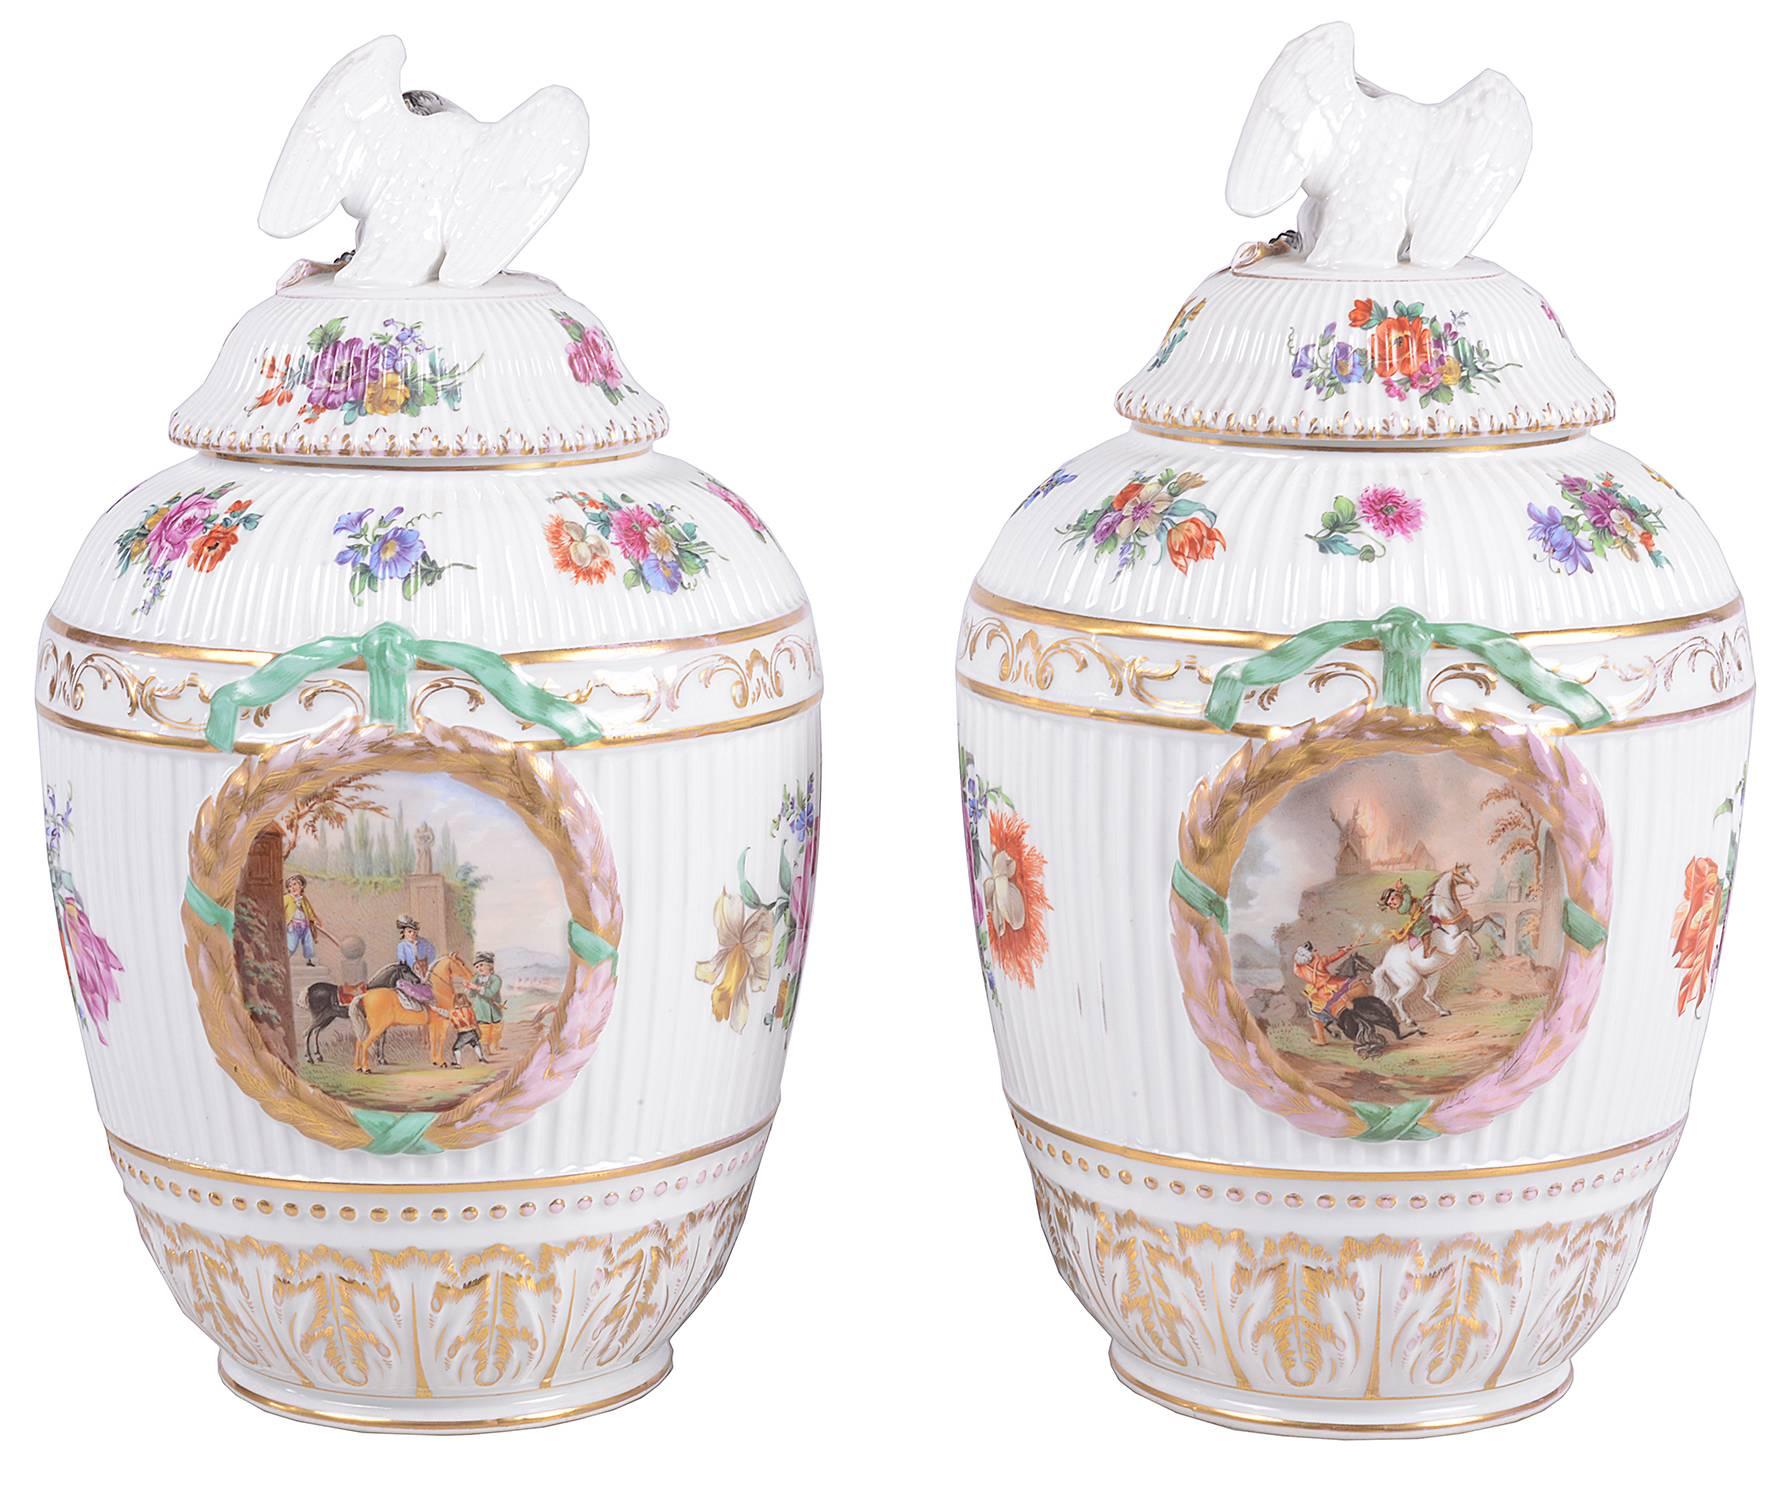 A good quality pair of 19th century Berlin porcelain lidded vases. Each with Swan finials to the lids, floral decoration and panels depicting horse man.